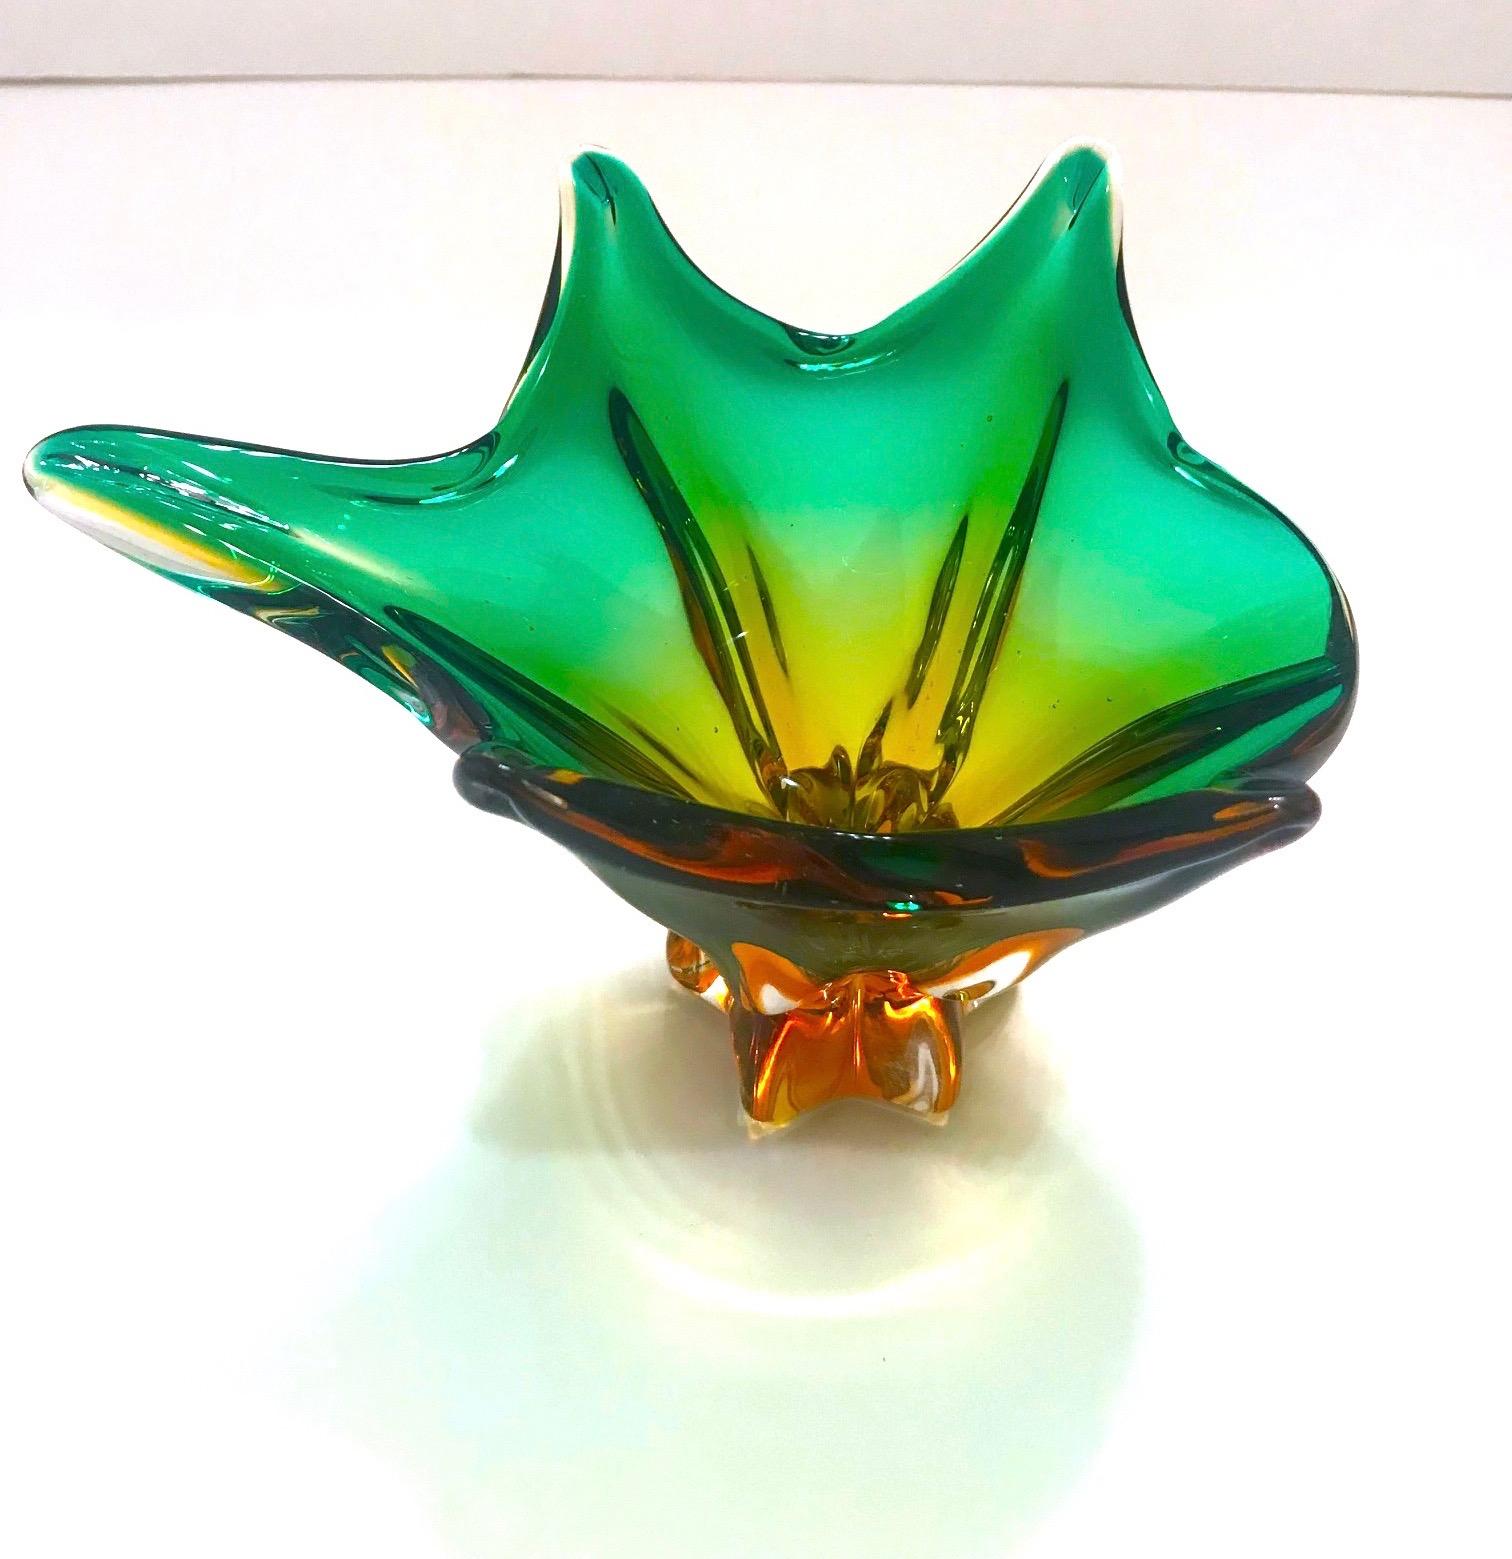 Mid-Century Modern 1950s Abstract Murano Sommerso Vase in Emerald and Amber Hues, Italy